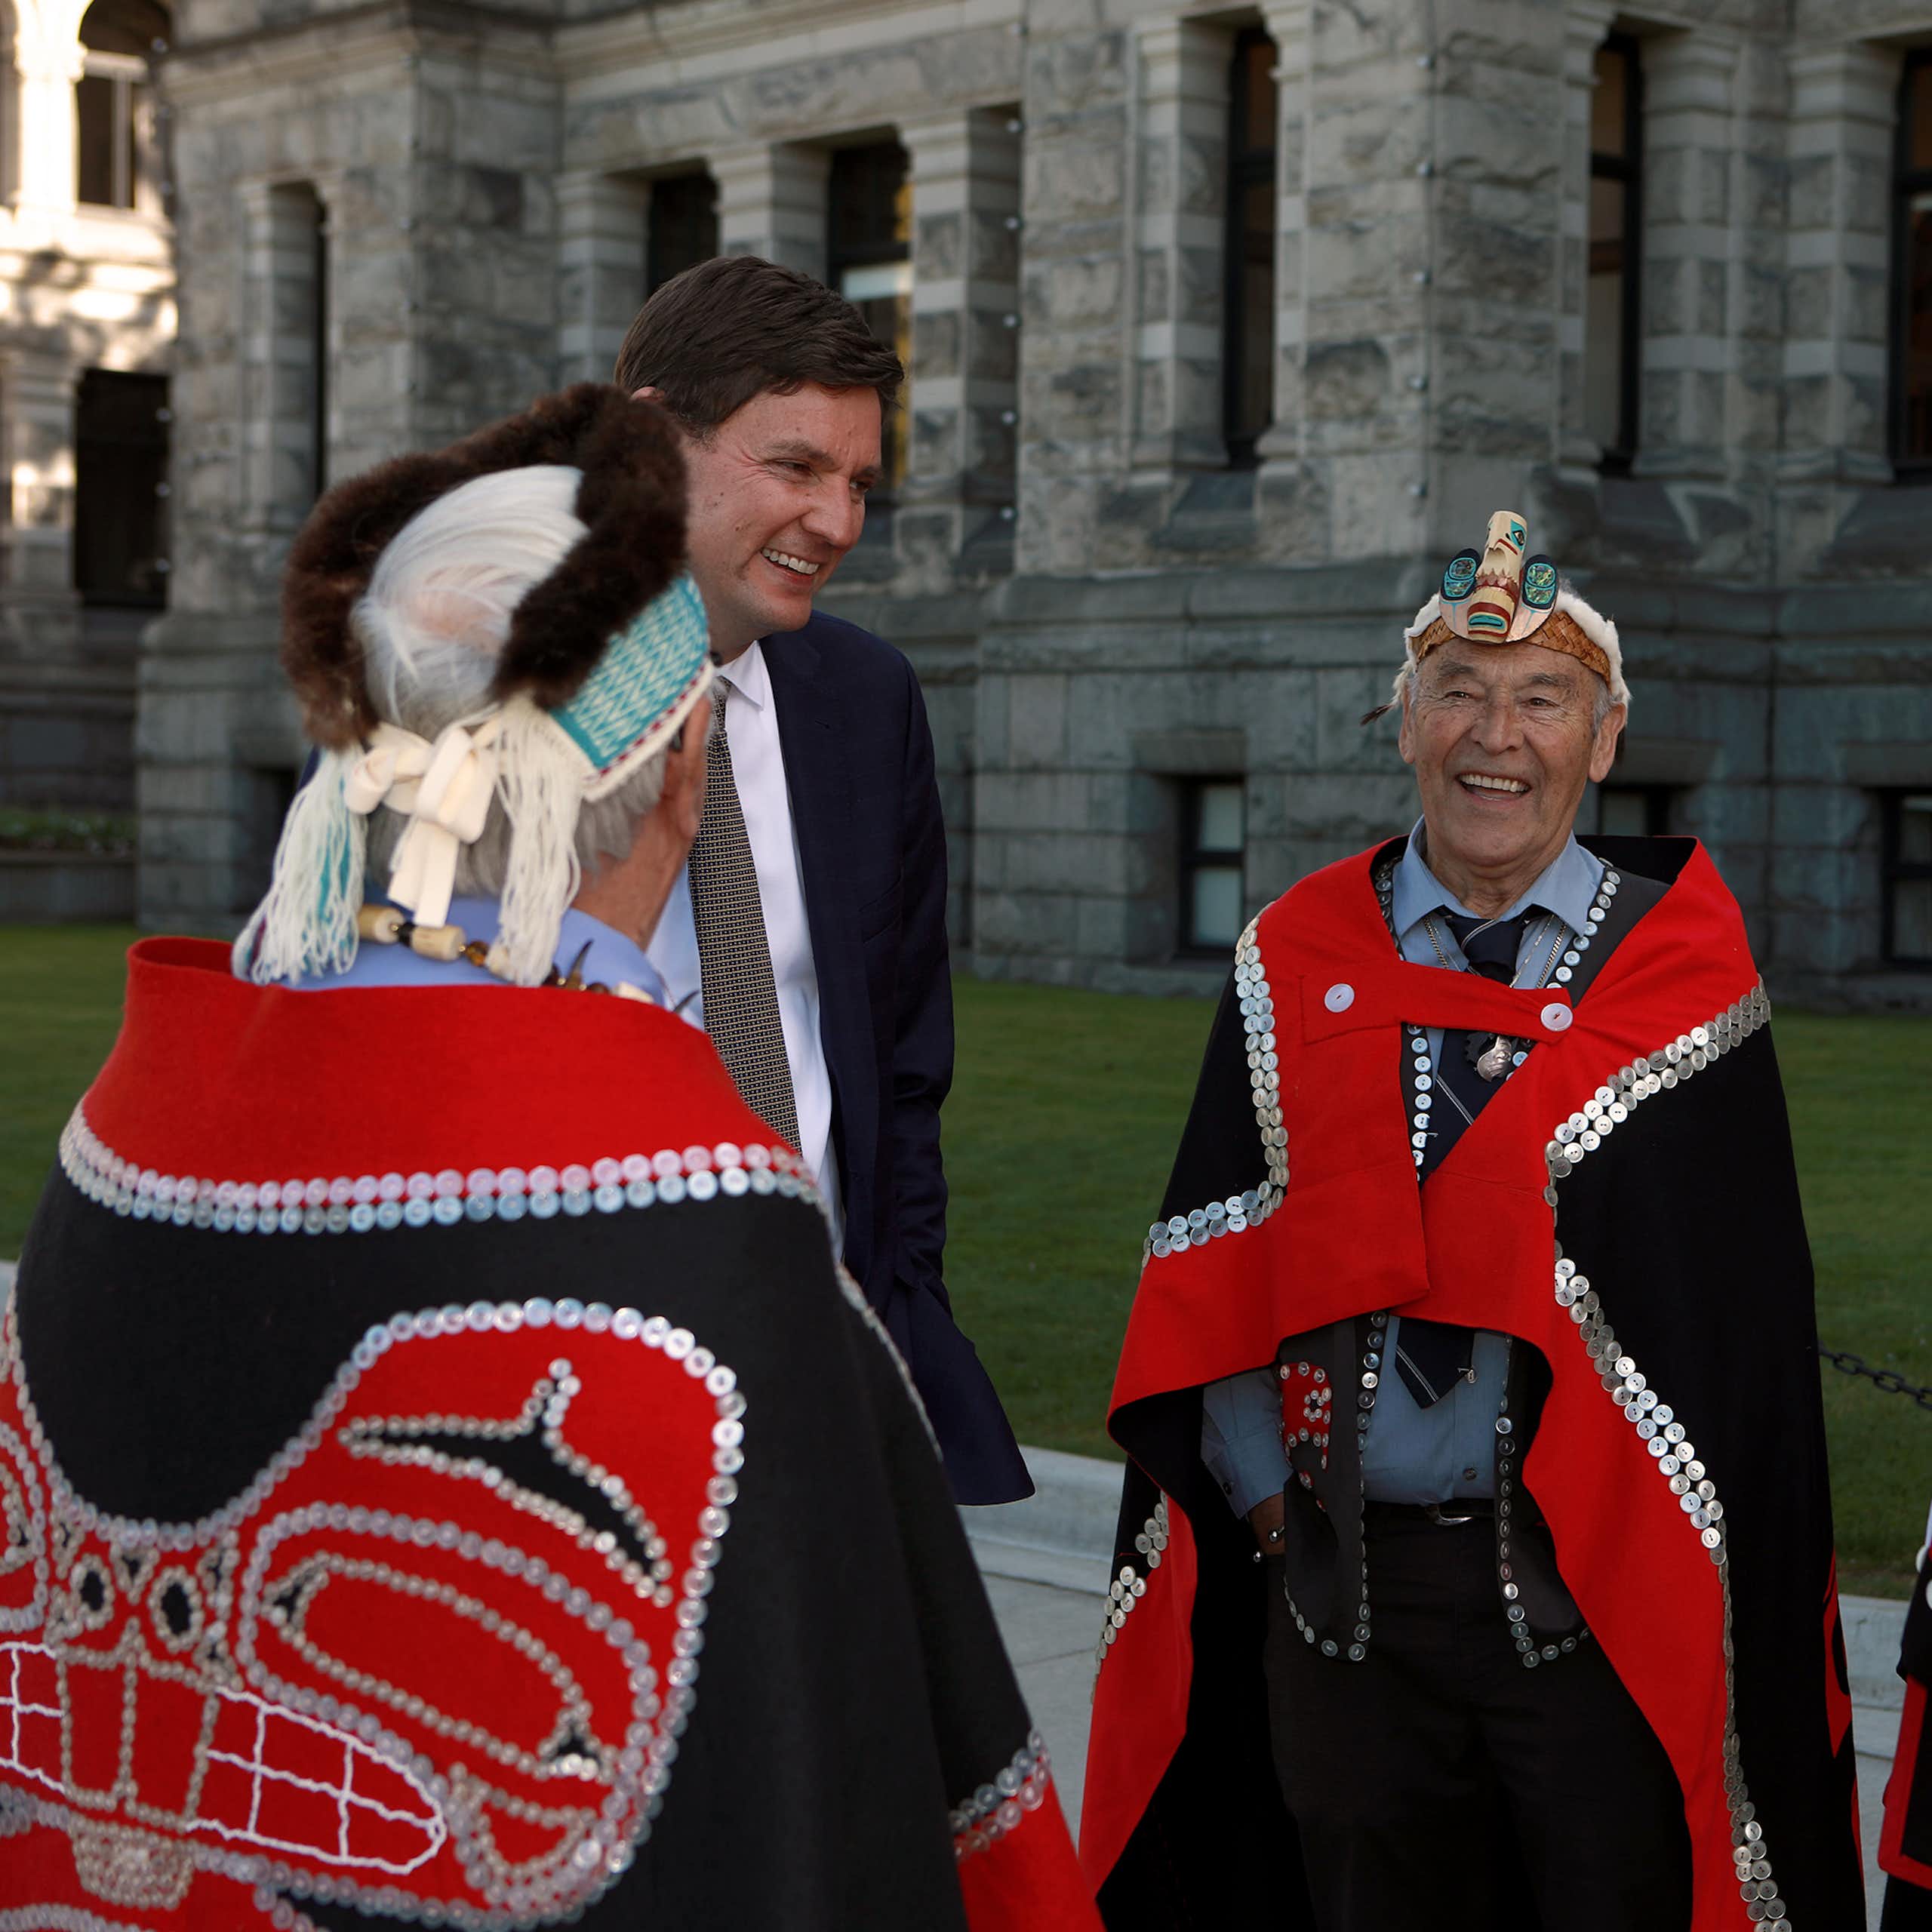 A man in a suit smile and he talks with Indigenous men in red and blue ceremonial garb who are also smiling.